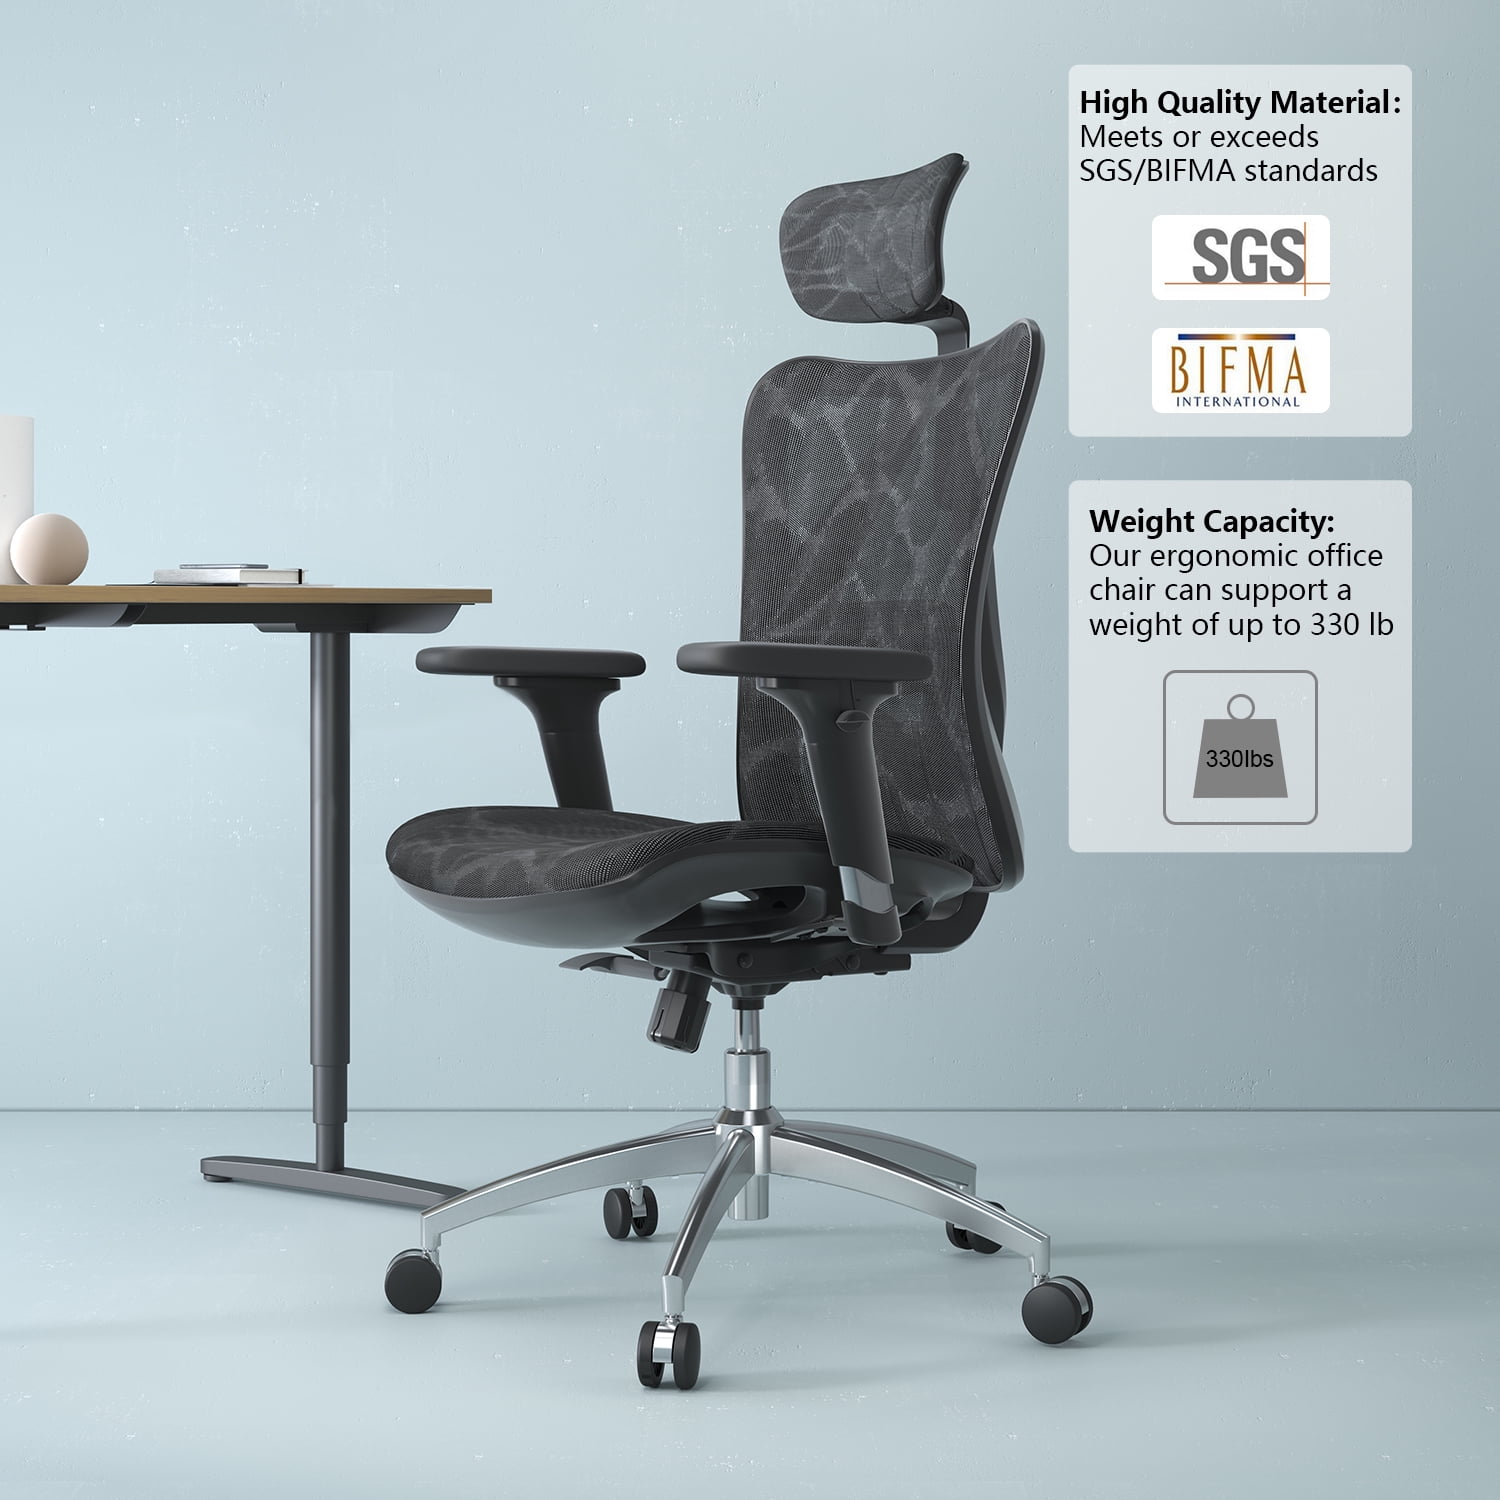 SIHOO M57 Ergonomic Office Chair with 3 Way Armrests Lumbar Support and  Adjustable Headrest High Back Tilt Function Light Grey